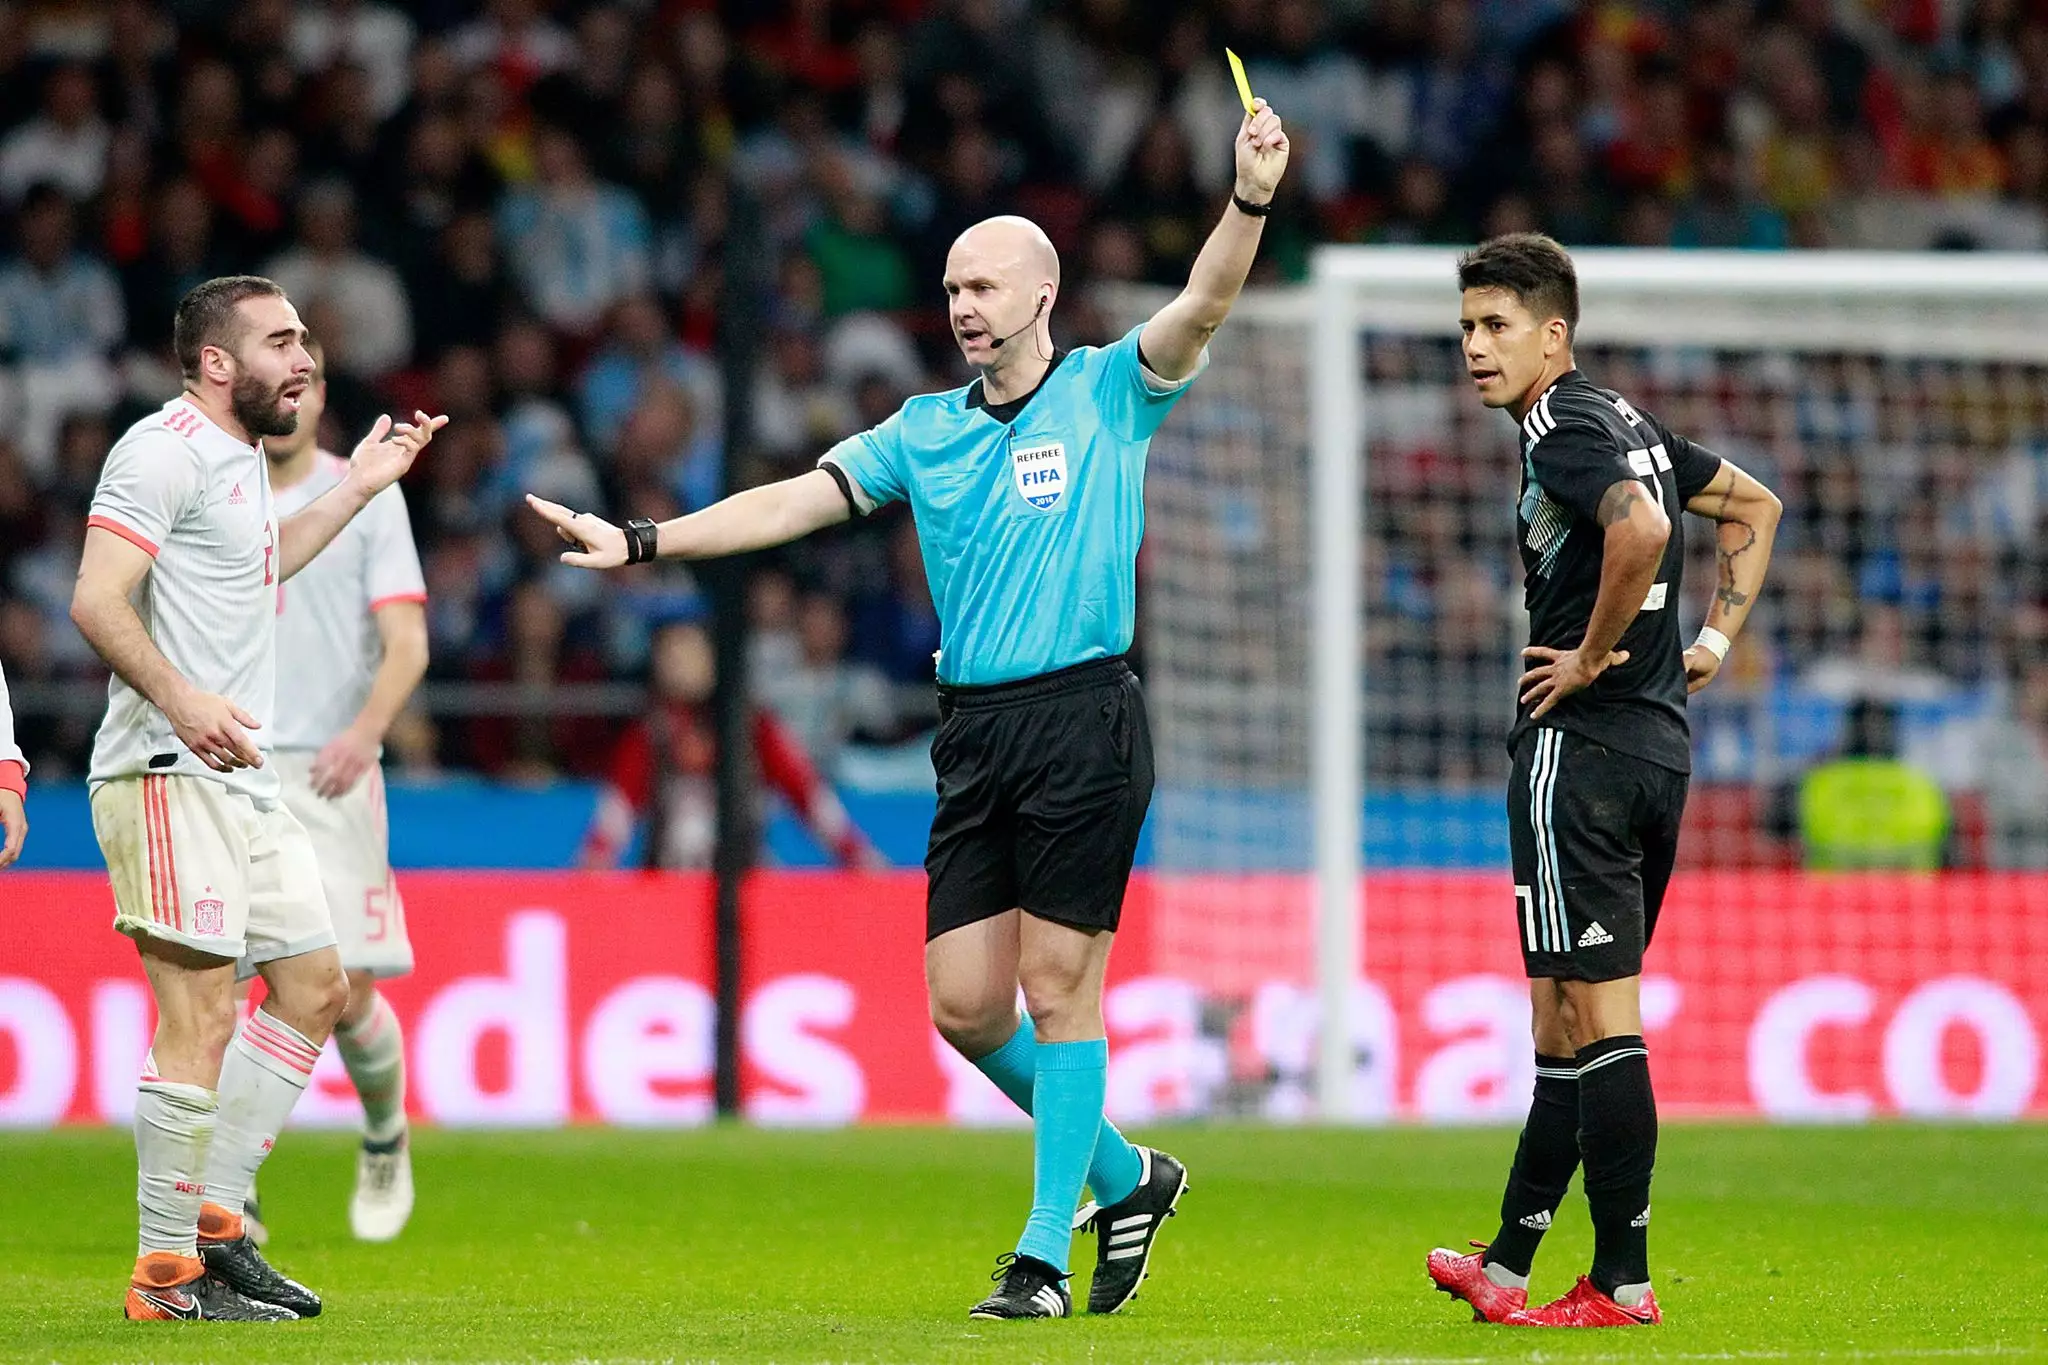 Taylor shows a yellow card to Argentina's Meza. Image: PA